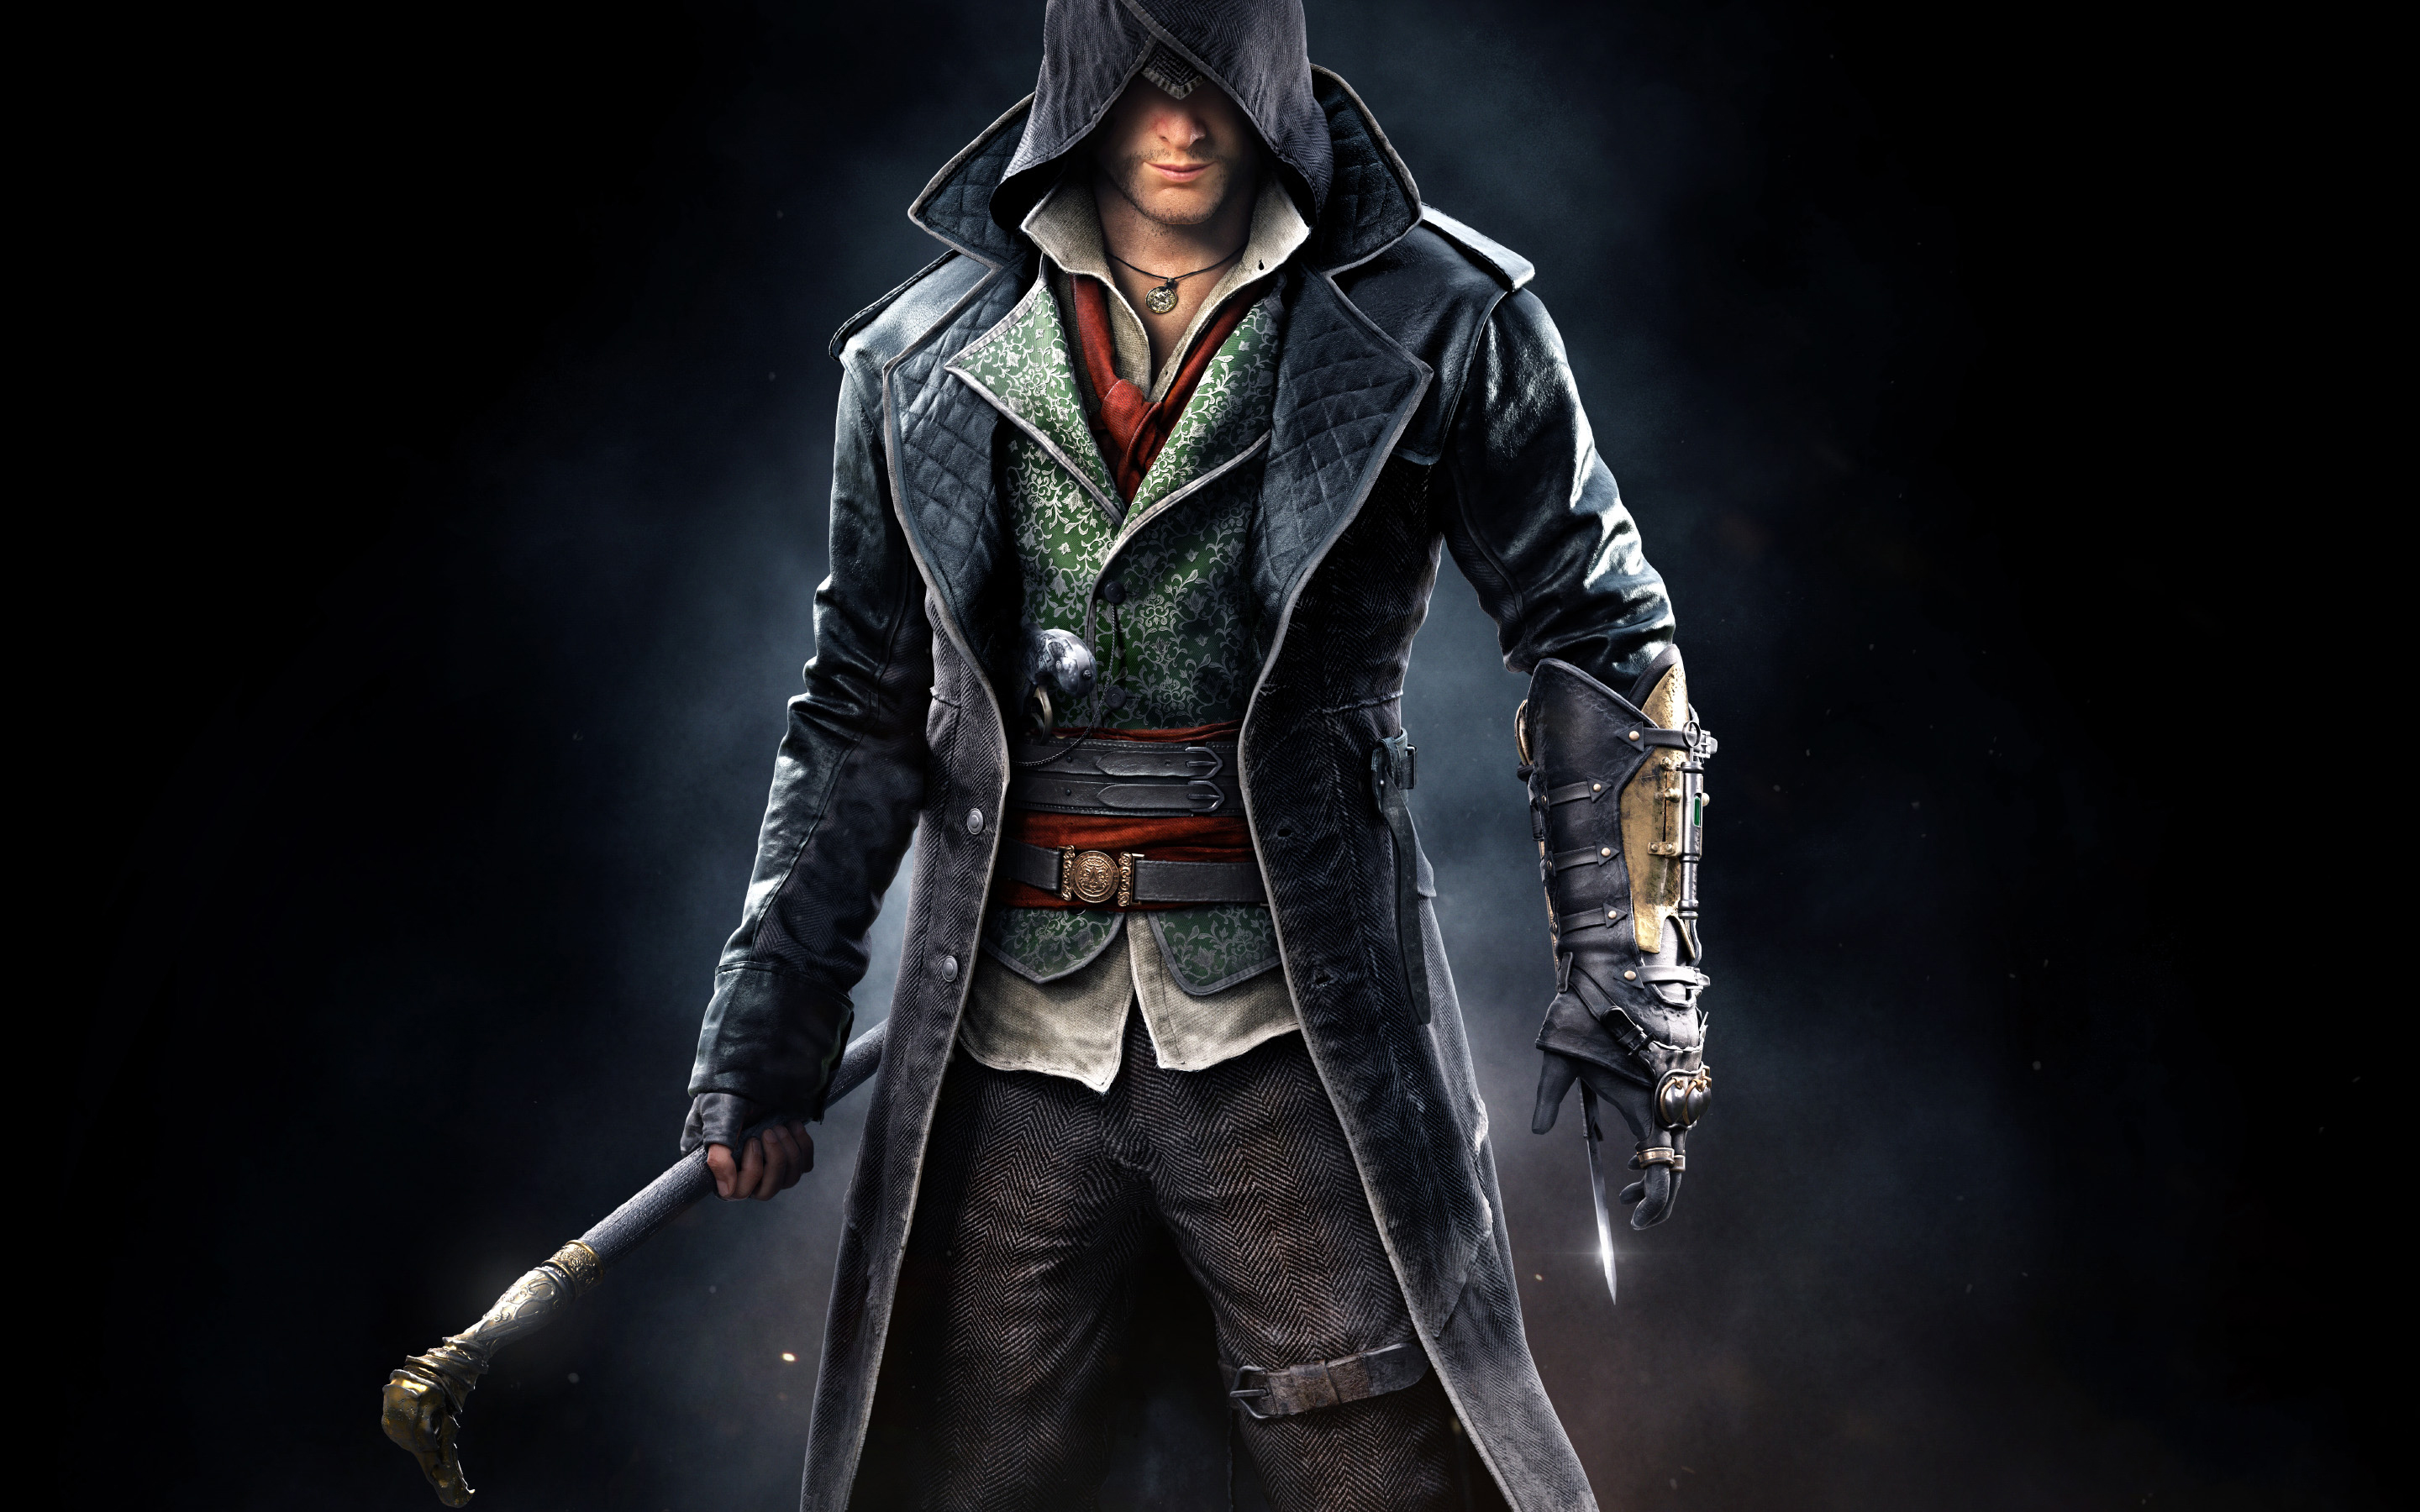 jacob frye wallpaper,action figure,darkness,outerwear,fictional character,games